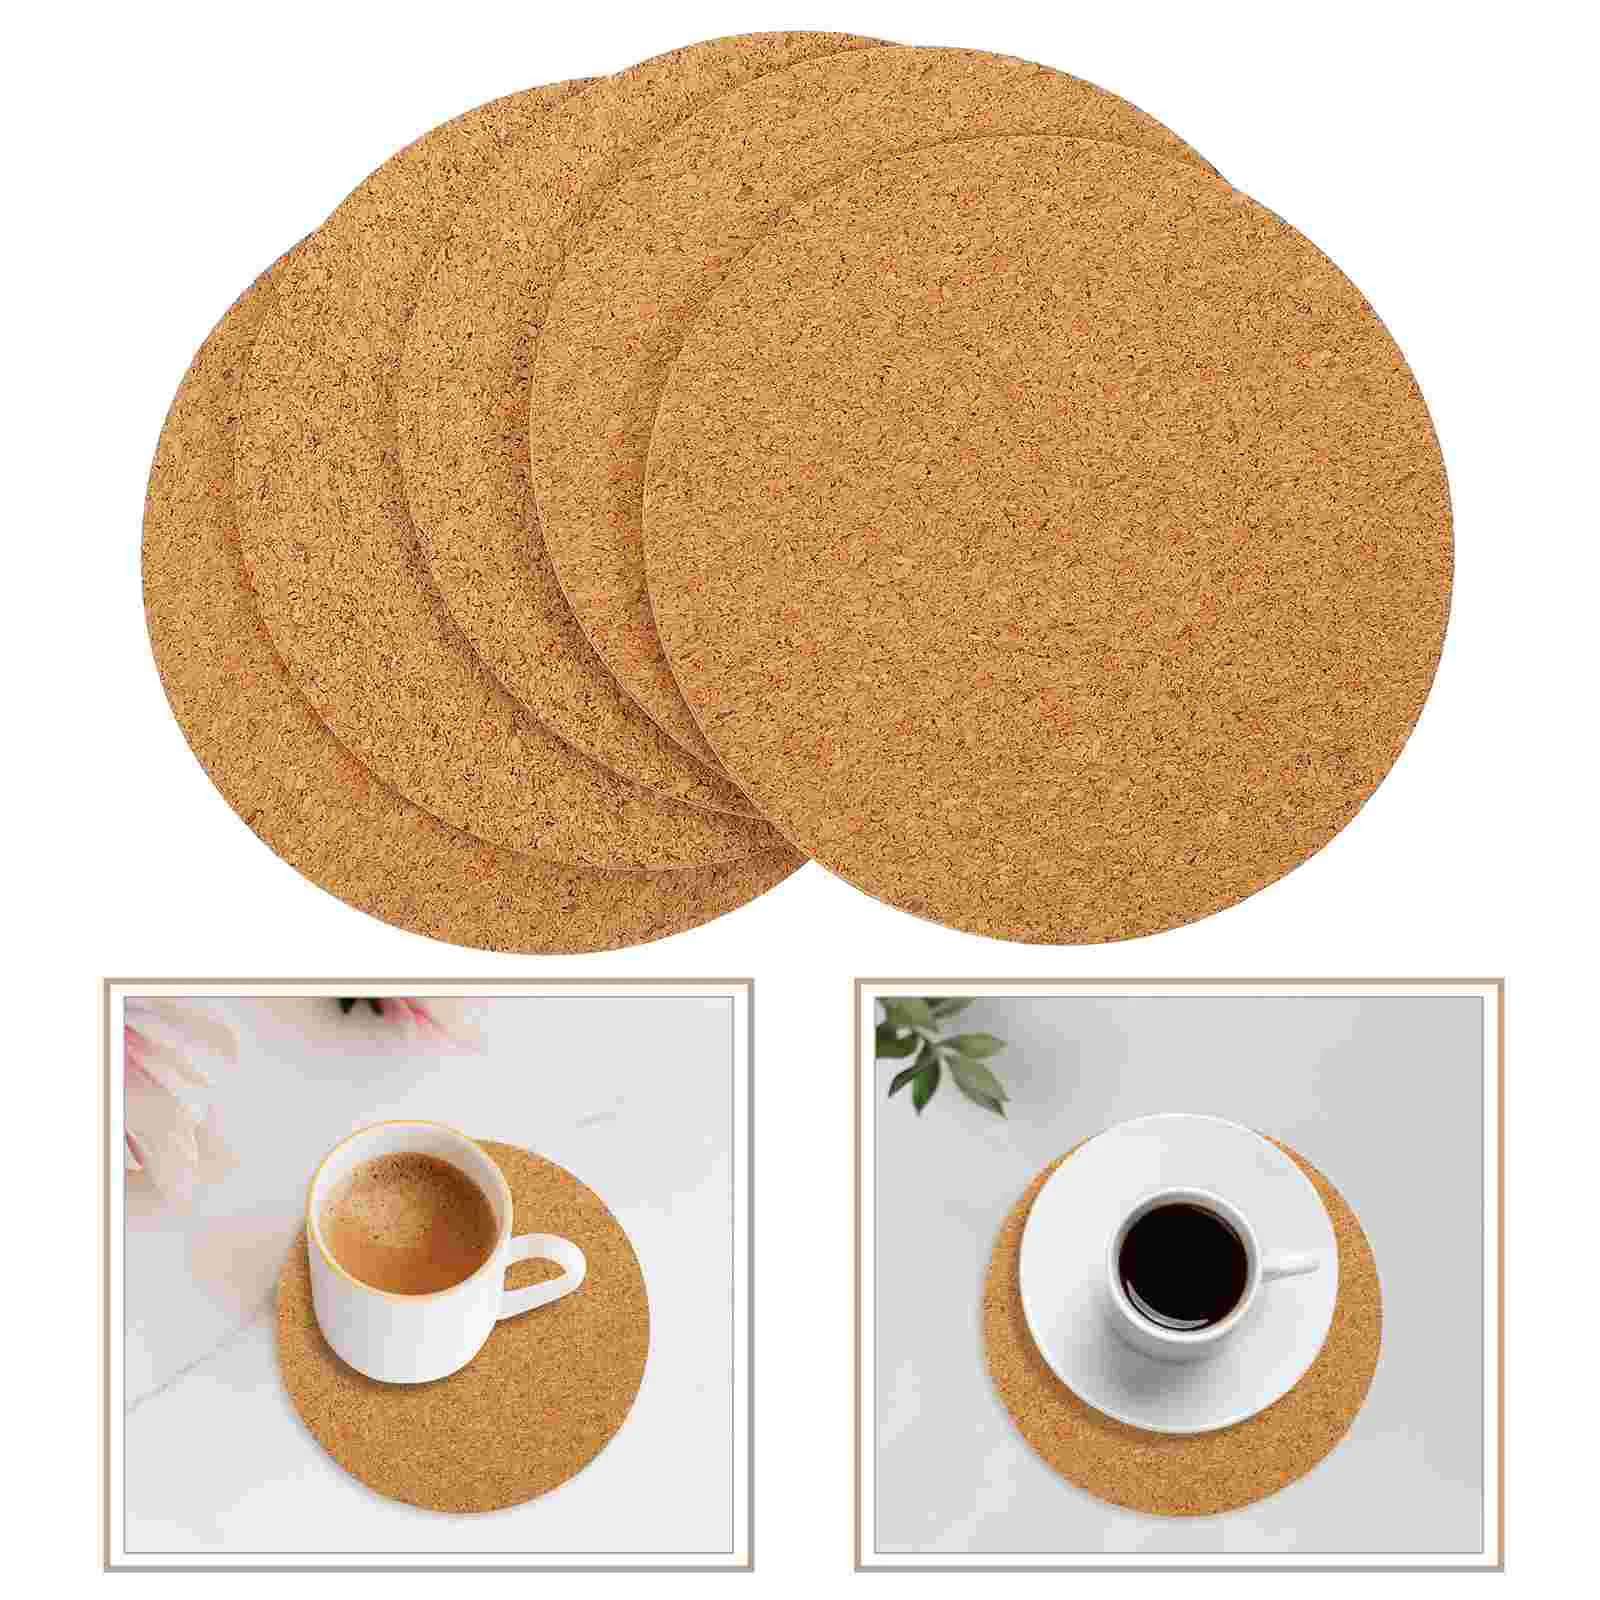 

Cork Coaster Adhesive Coasters Cup Self Mat Tiles Drink Pad Backing Wood Round Pads Table Board Sticky Mats Wooden Tea Squares